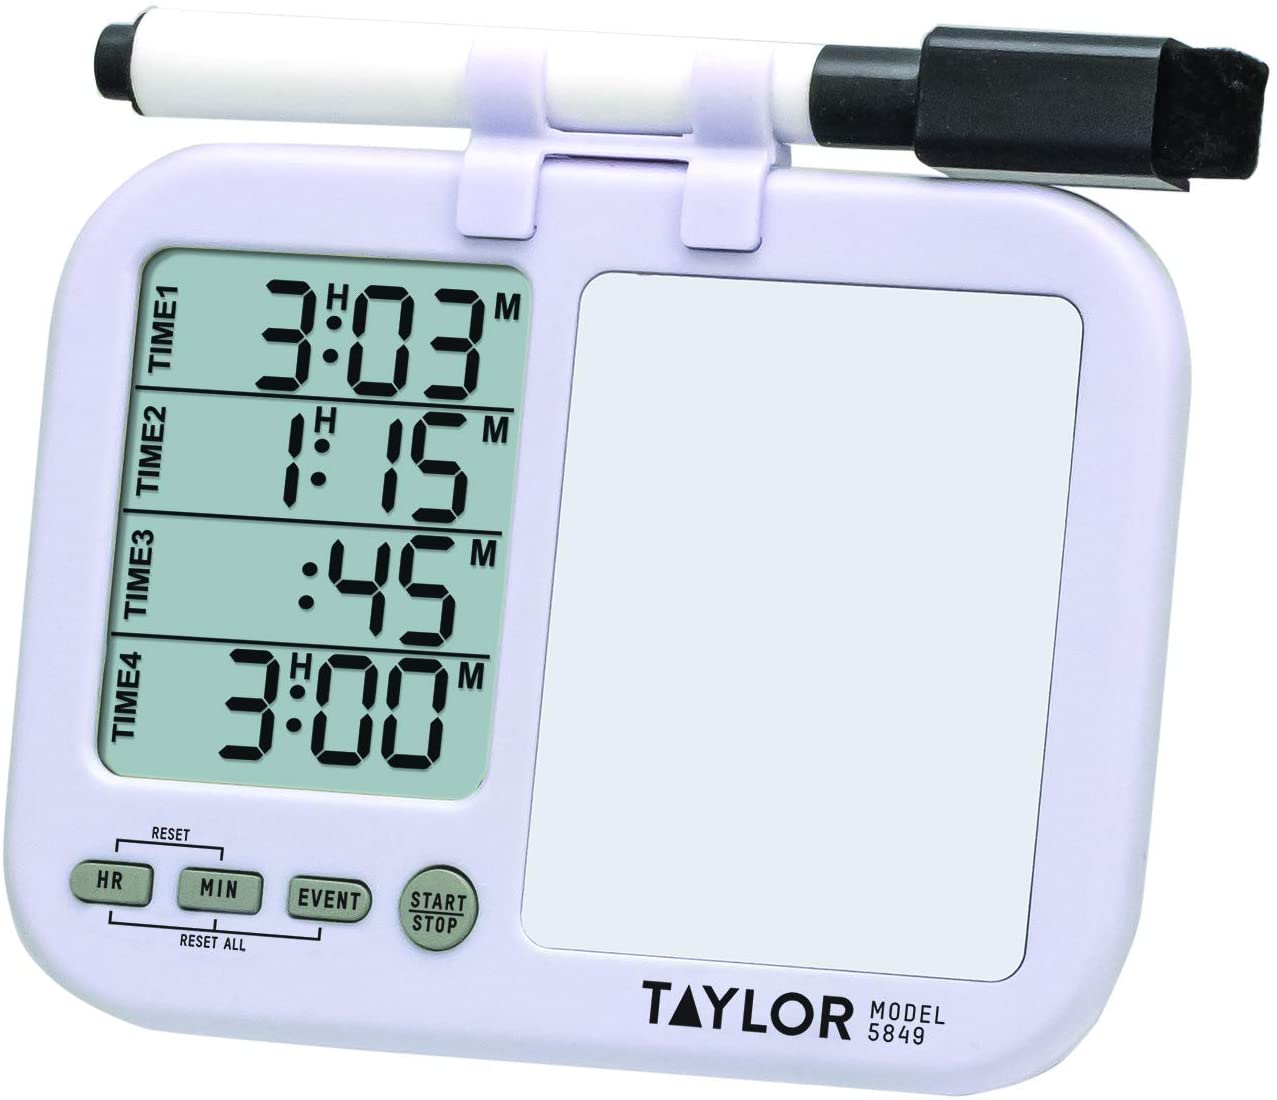 Taylor-Precision-Products-Four-Event-Kitchen-Timer-min